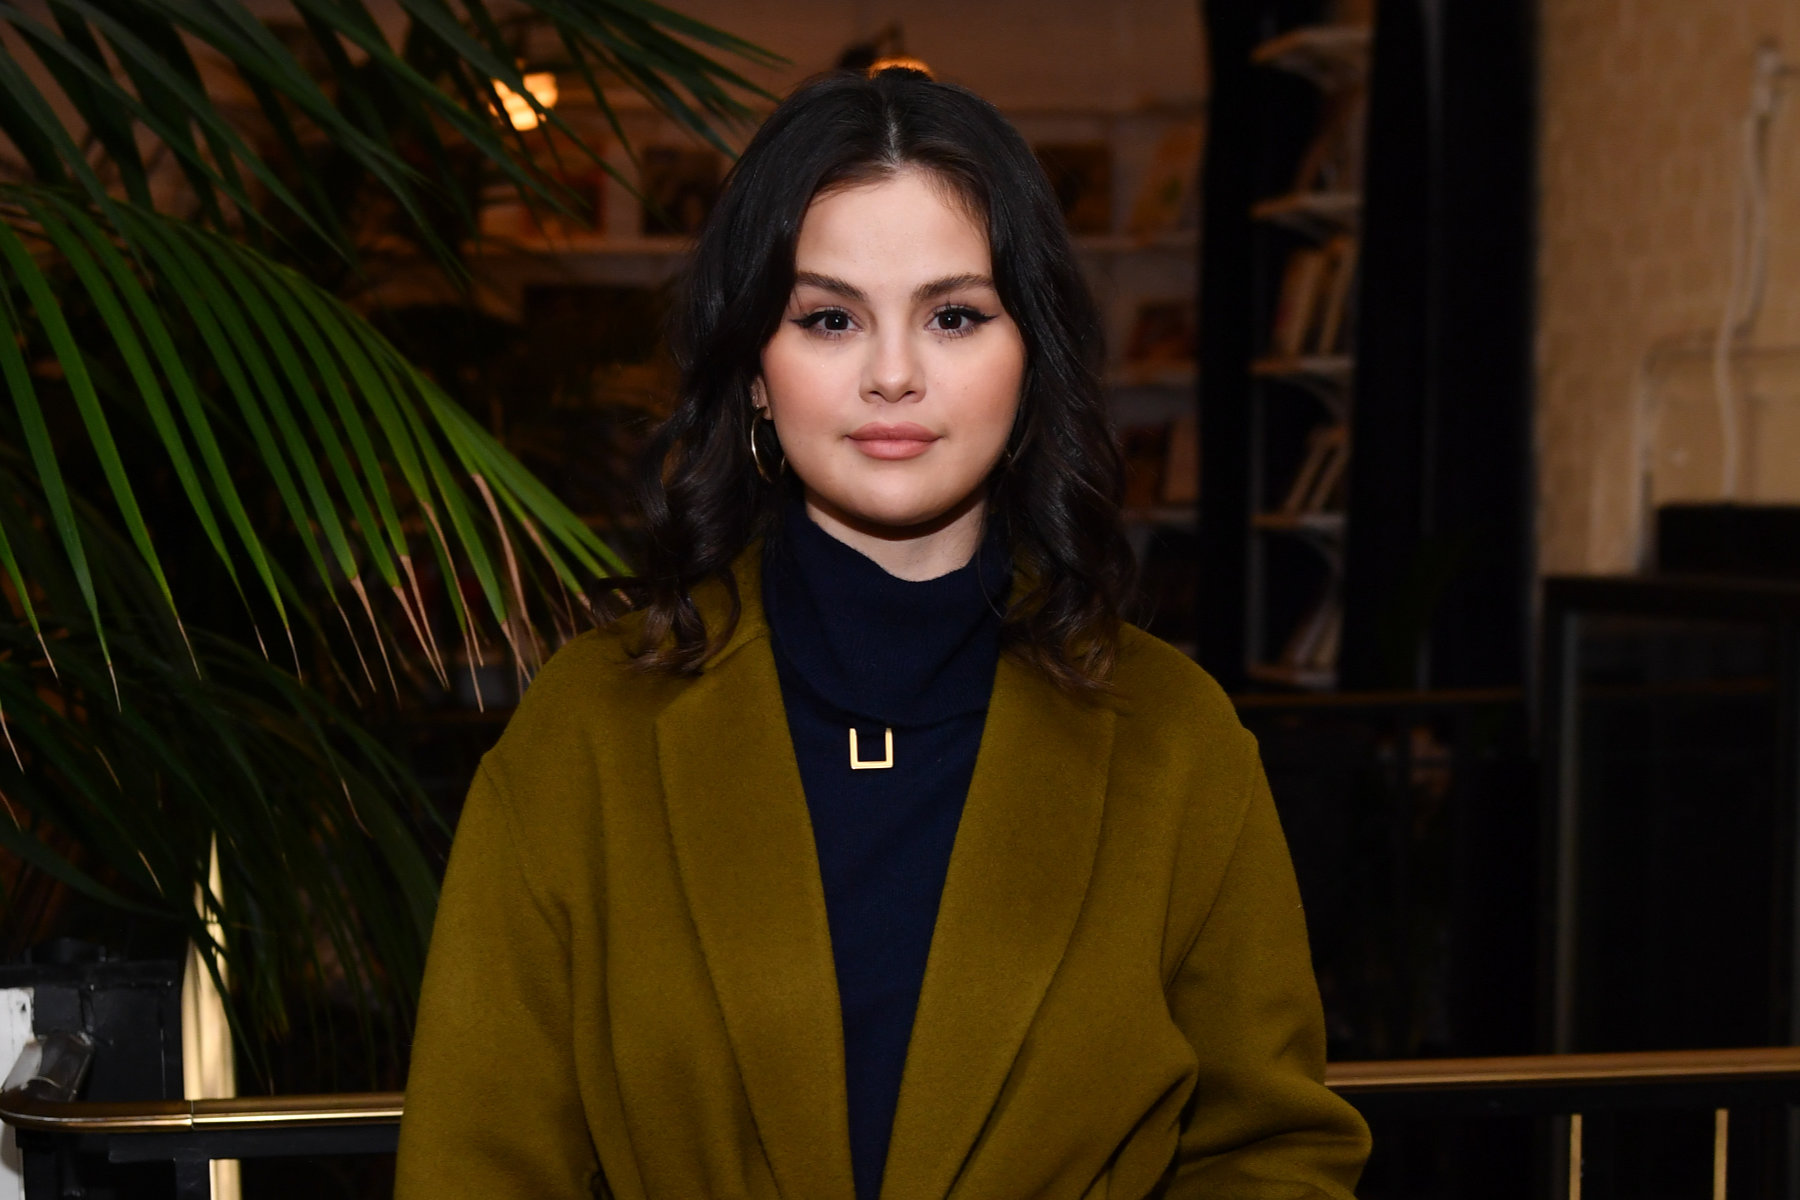 NEW YORK, NEW YORK - NOVEMBER 30: Selena Gomez attends a screening of Apple's "Selena Gomez: My Mind &amp; Me" presented by Benj Pasek and Justin Paul of "Spirited" at Metrograph on November 30, 2022 in New York City. (Photo by Noam Galai/Getty Images)